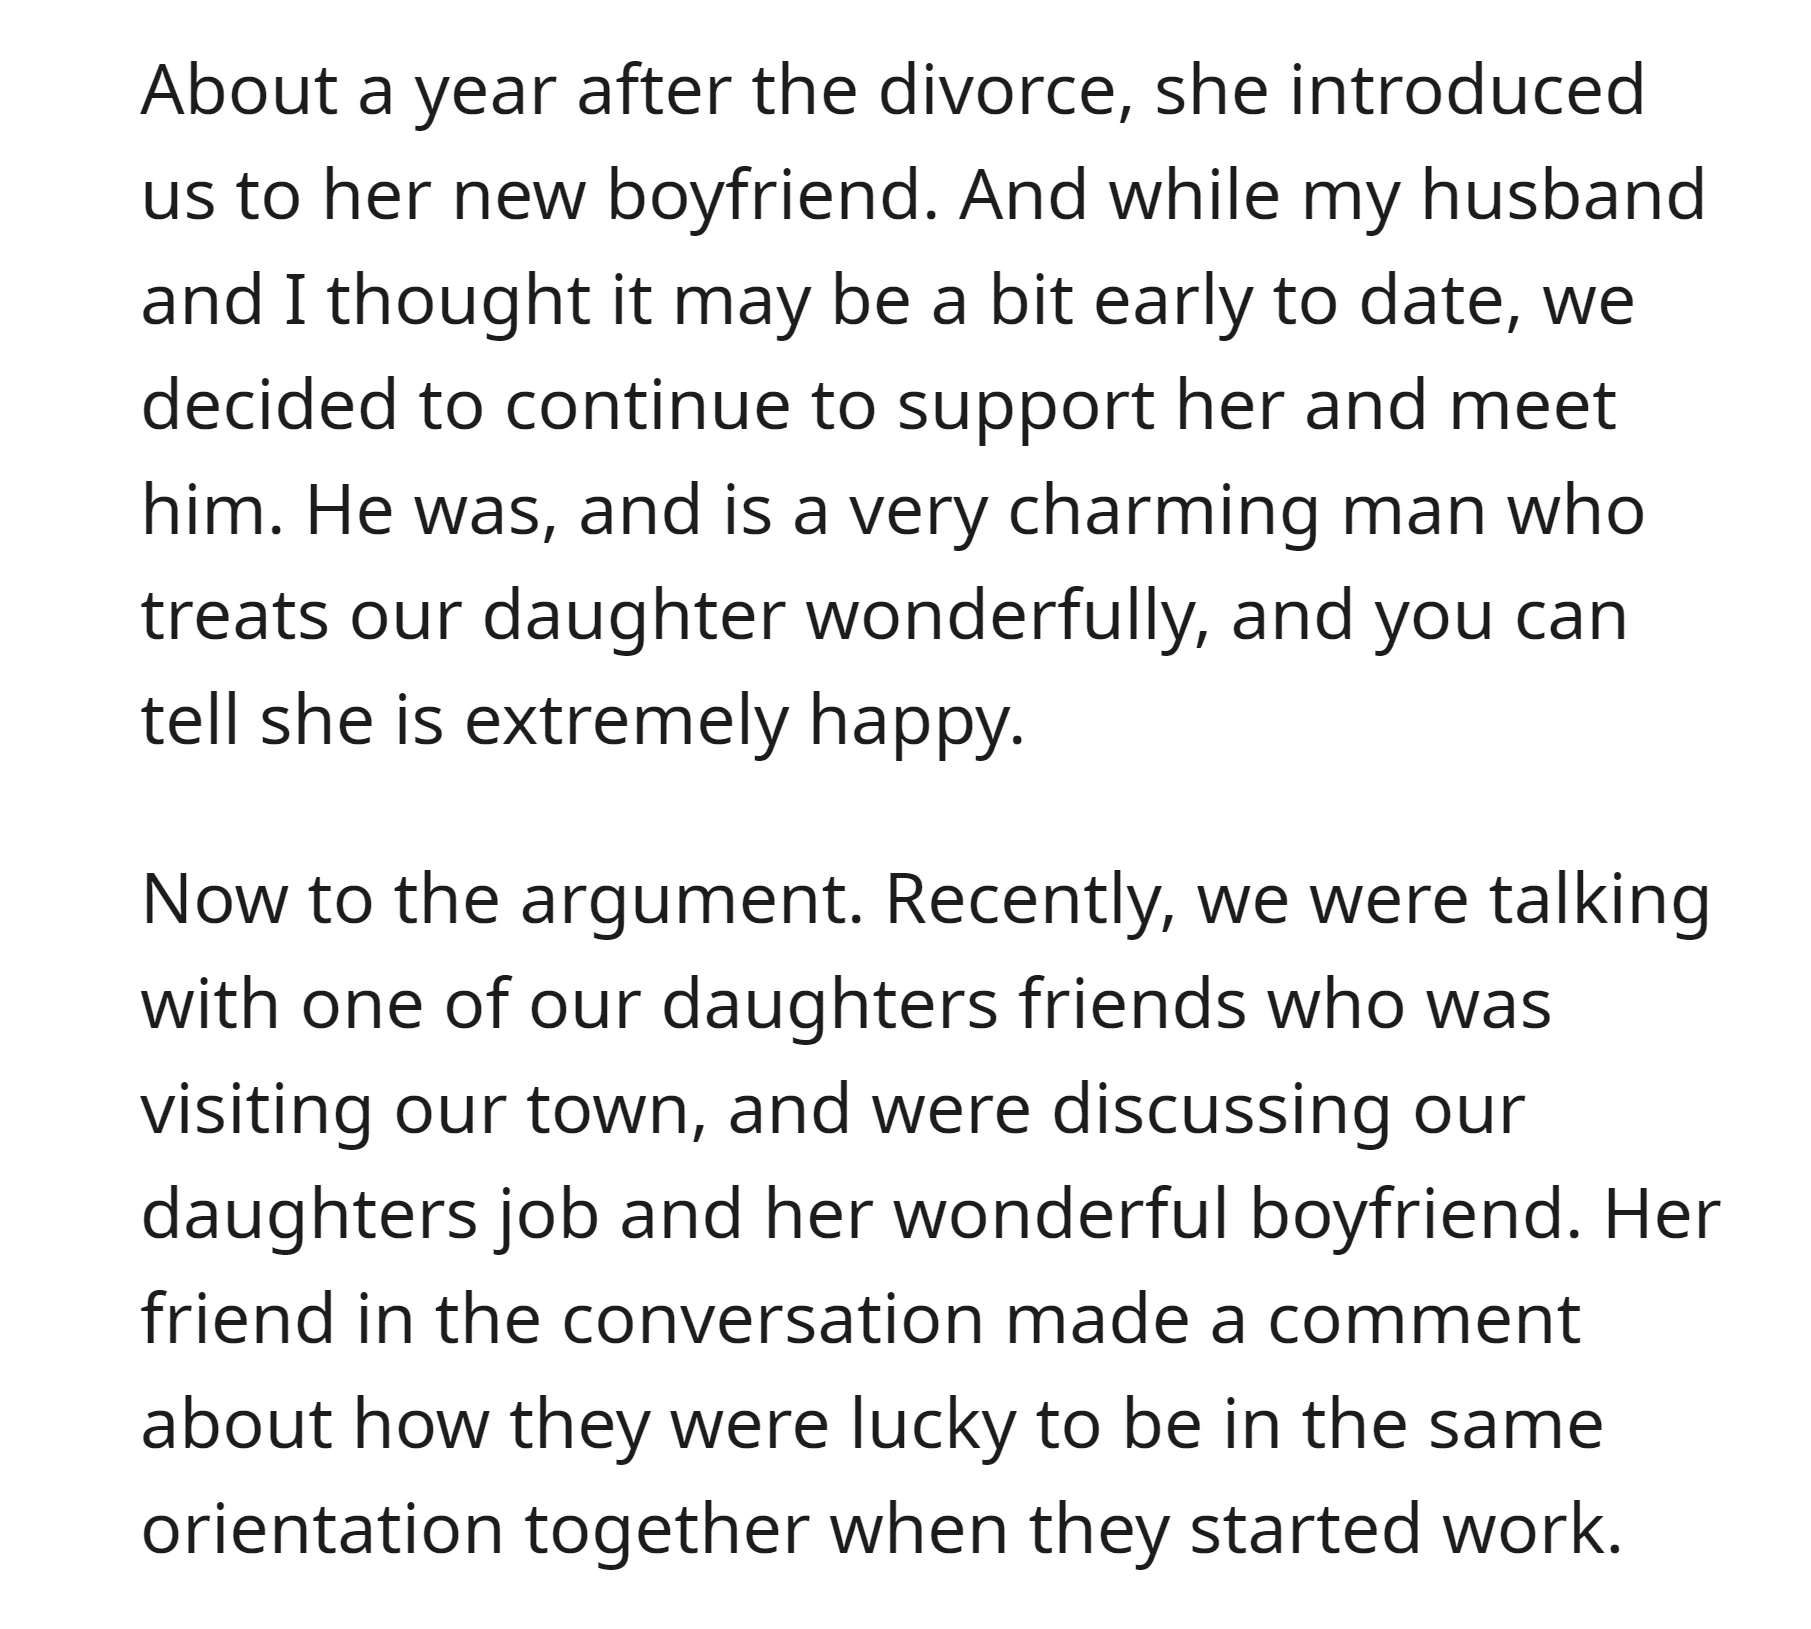 OP's daughter introduced her parents to her charming and caring boyfriend